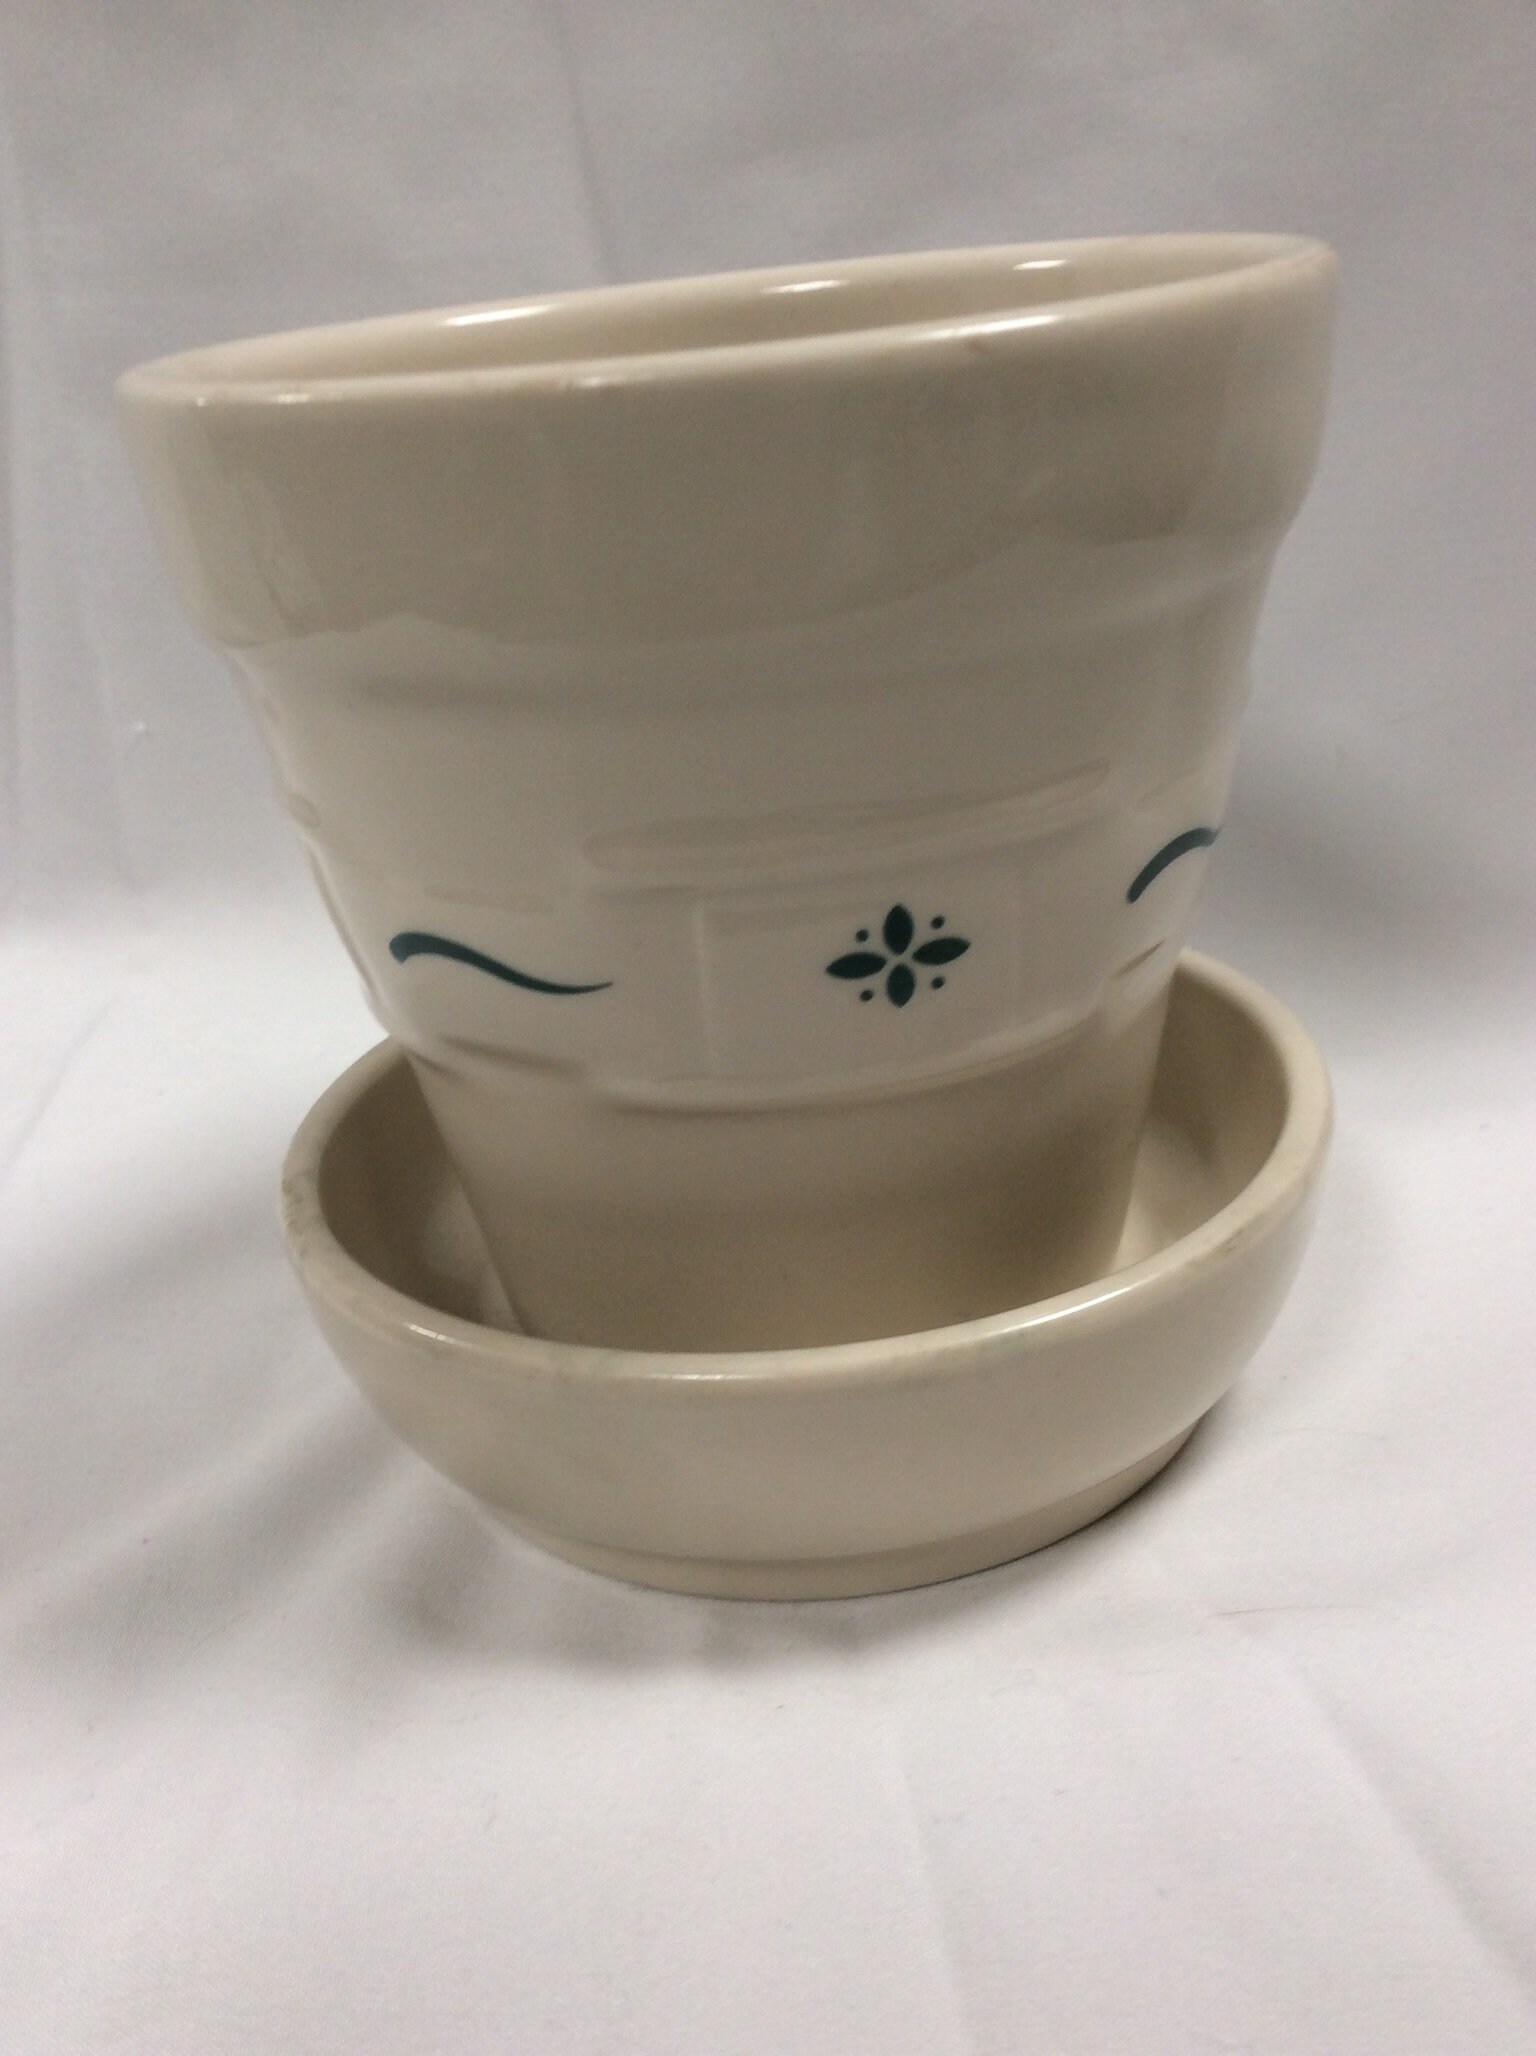 Longaberger Pottery is the Woven Traditions Heritage Green Pattern -  Miscellaneous Items - Ligonier, Indiana